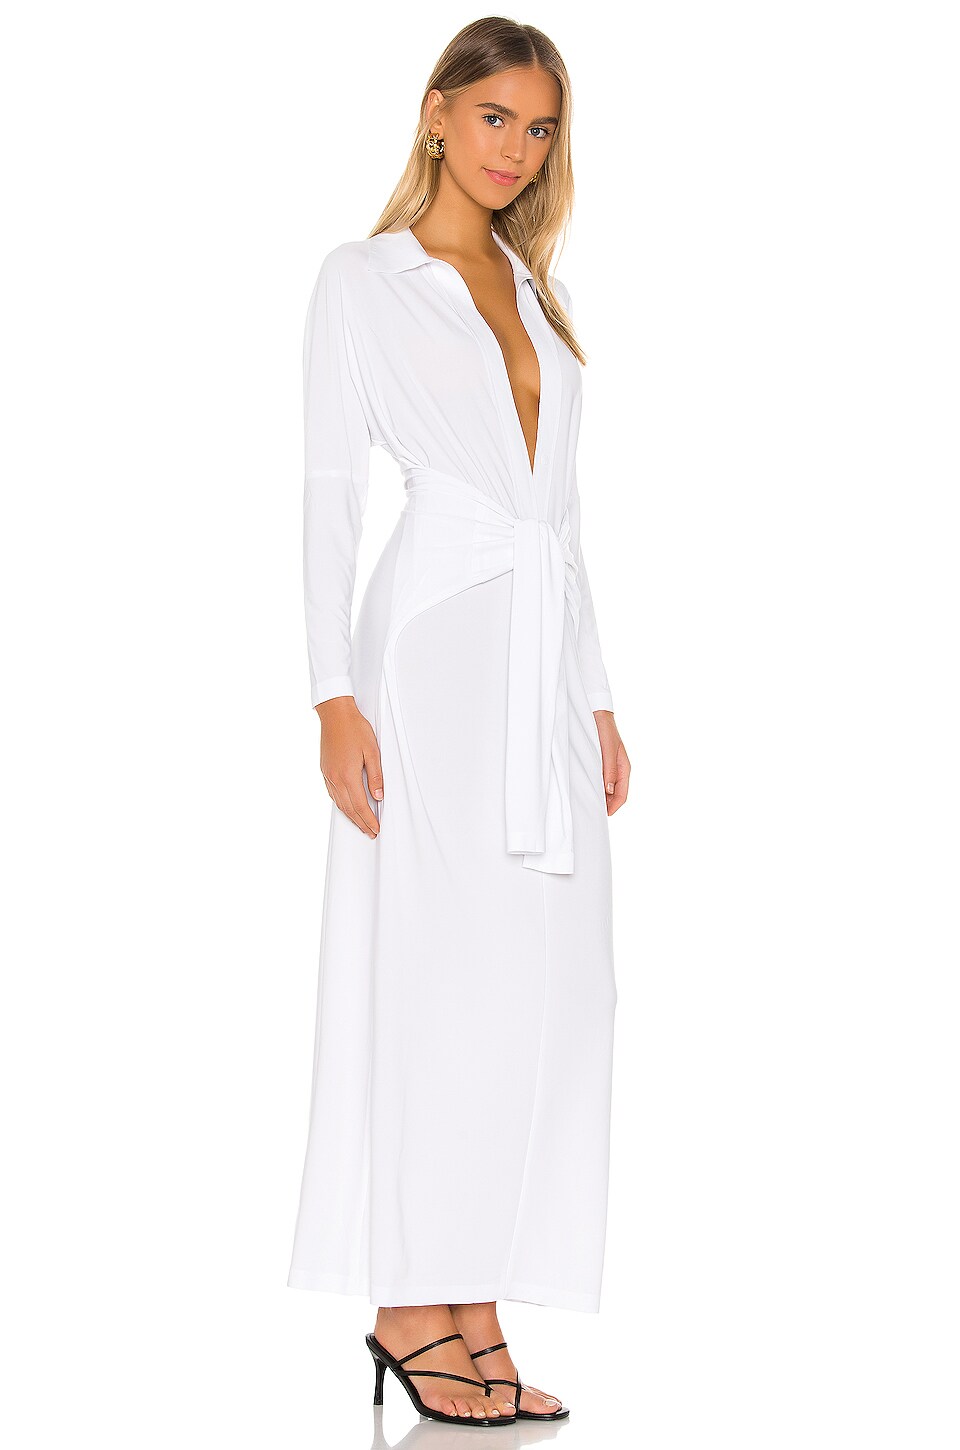 Norma Kamali Tie Front NK Shirt Dress in White | REVOLVE